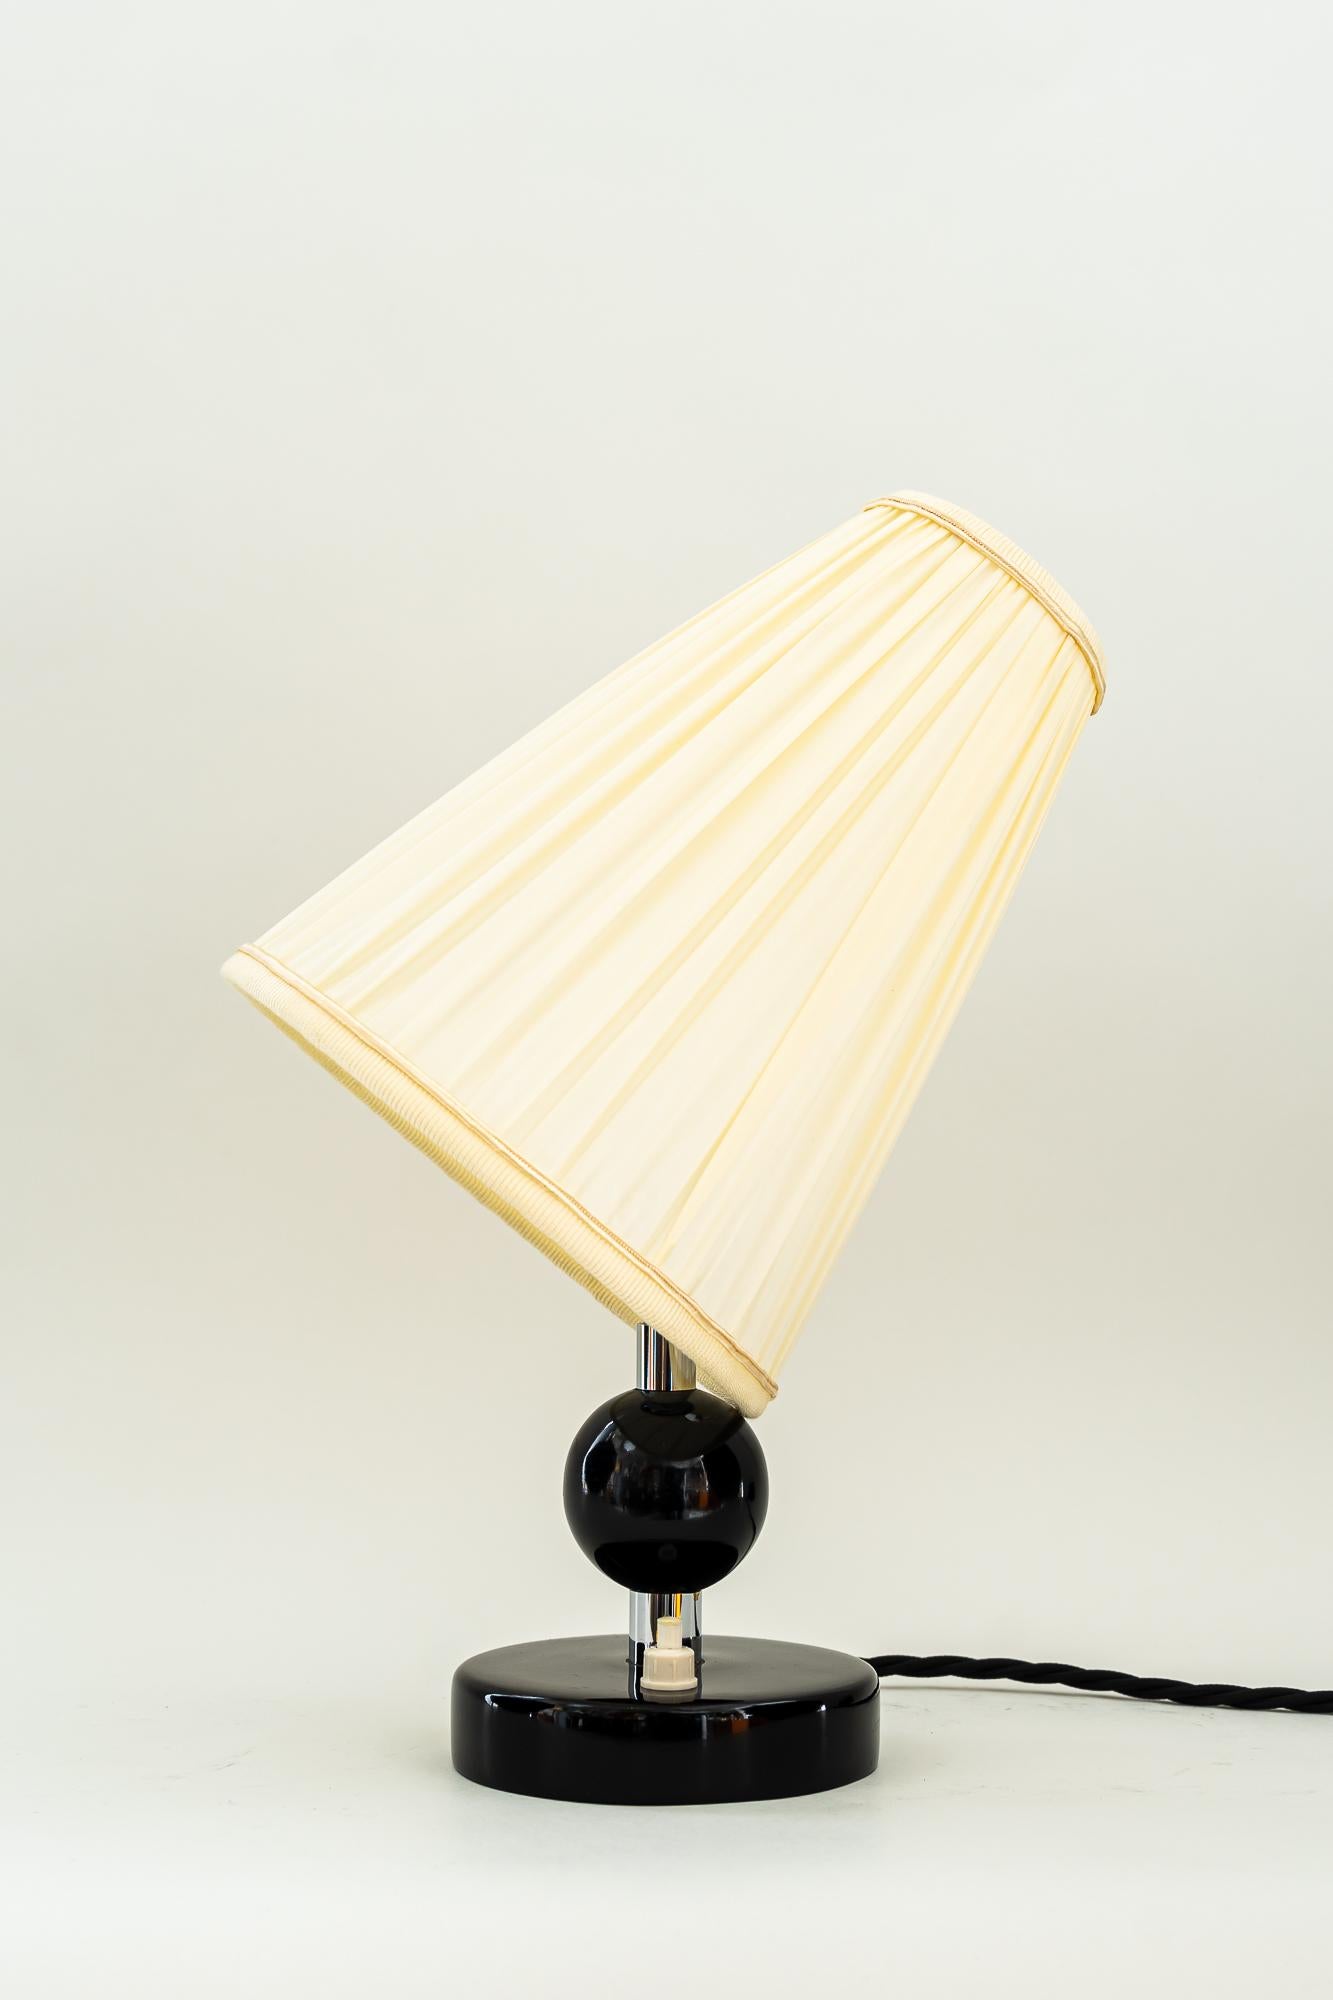 Art Deco wood base table lamp with fabric shades around 1920s
Nickel -plated 
Wood blackened 
Fabric shades are replaced ( new ).